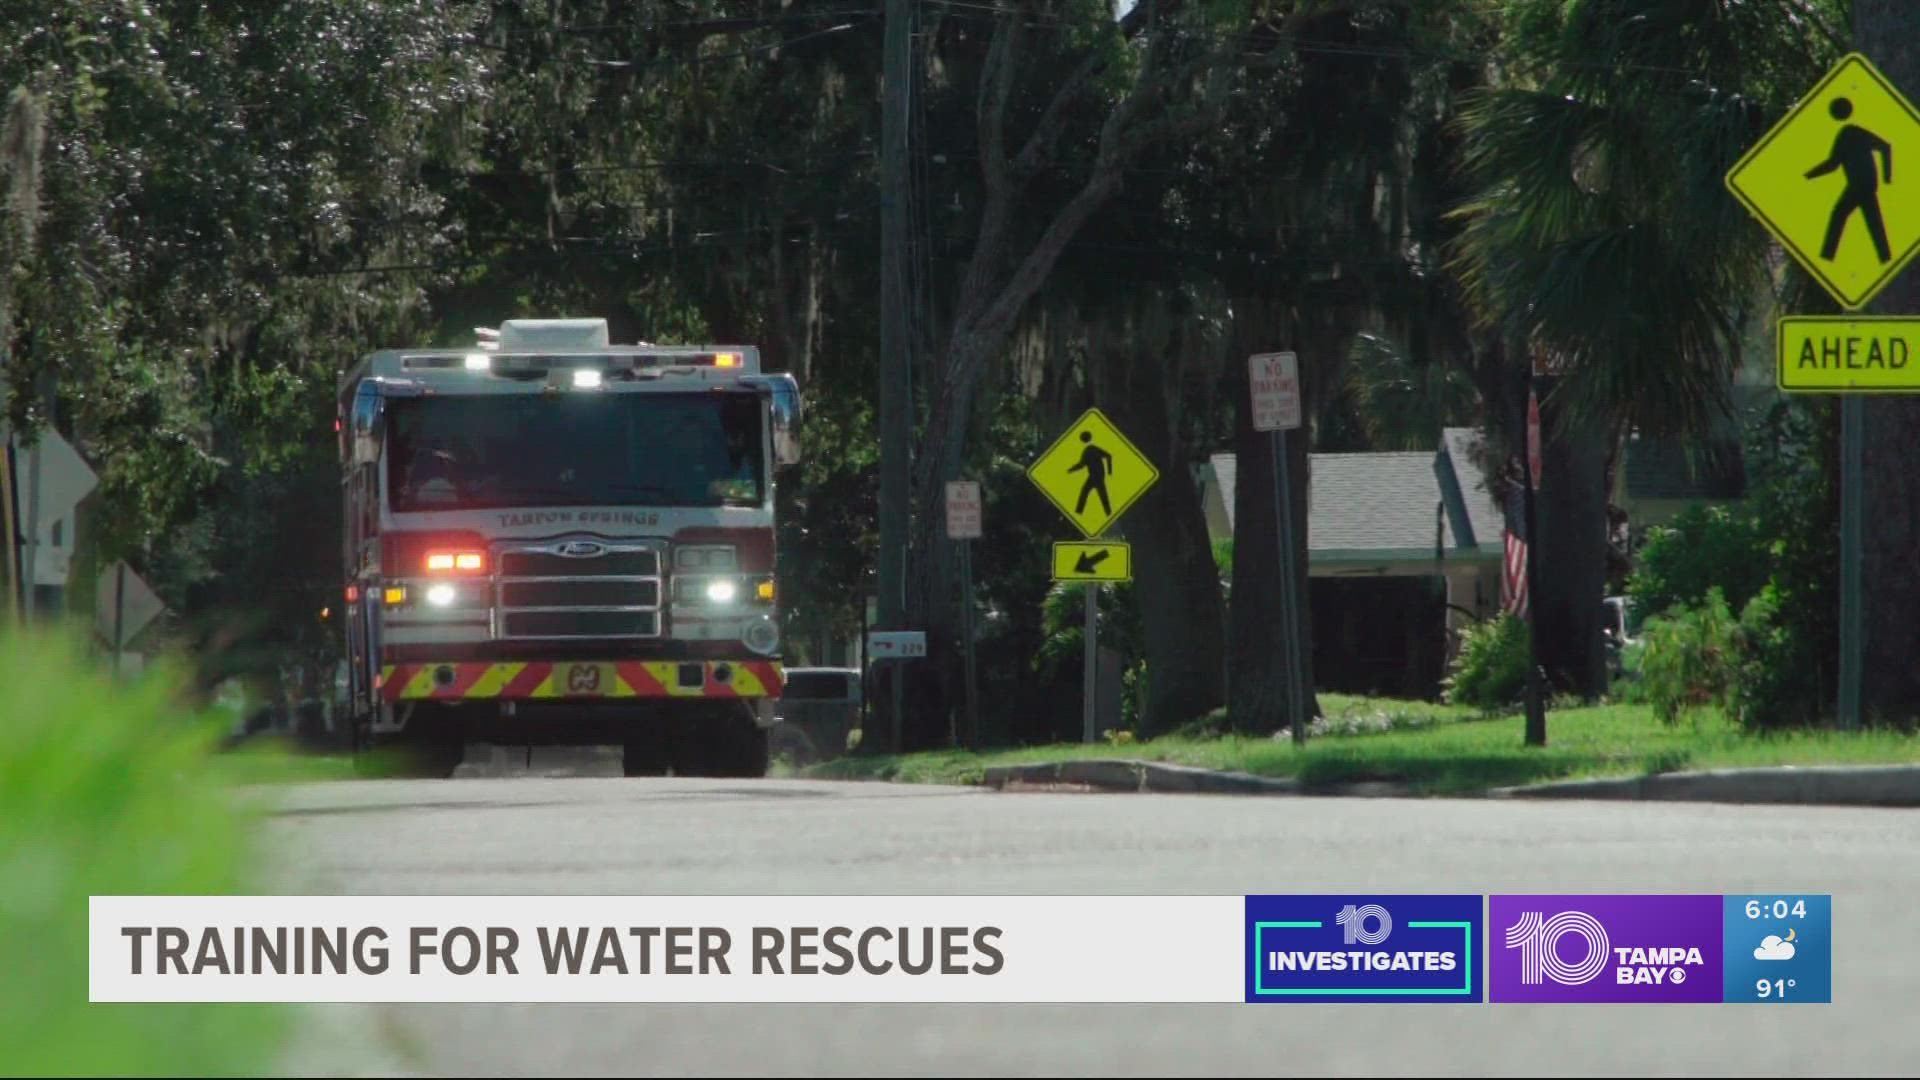 10Investigates has learned other agencies don't although data shows a car has driven into a Florida body of water in every single county.